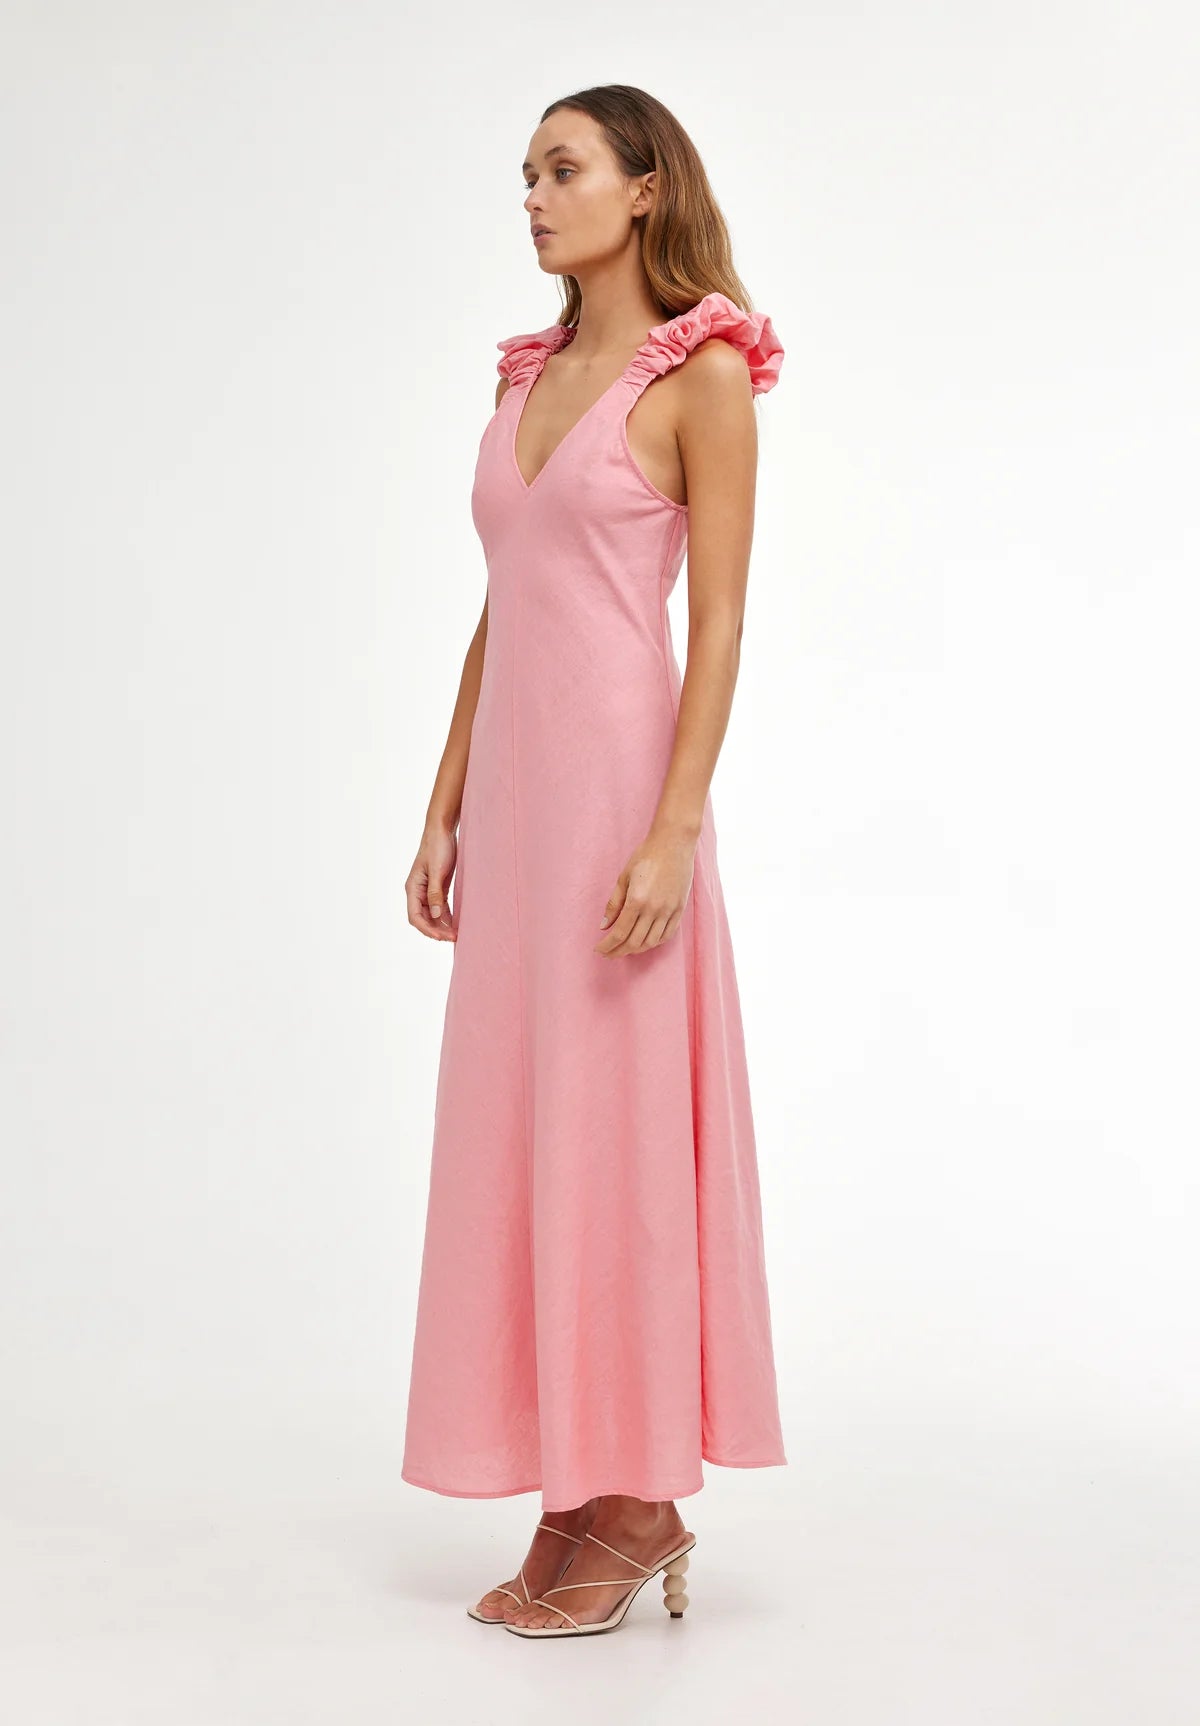 Kinney Paloma Dress in Coral Pink